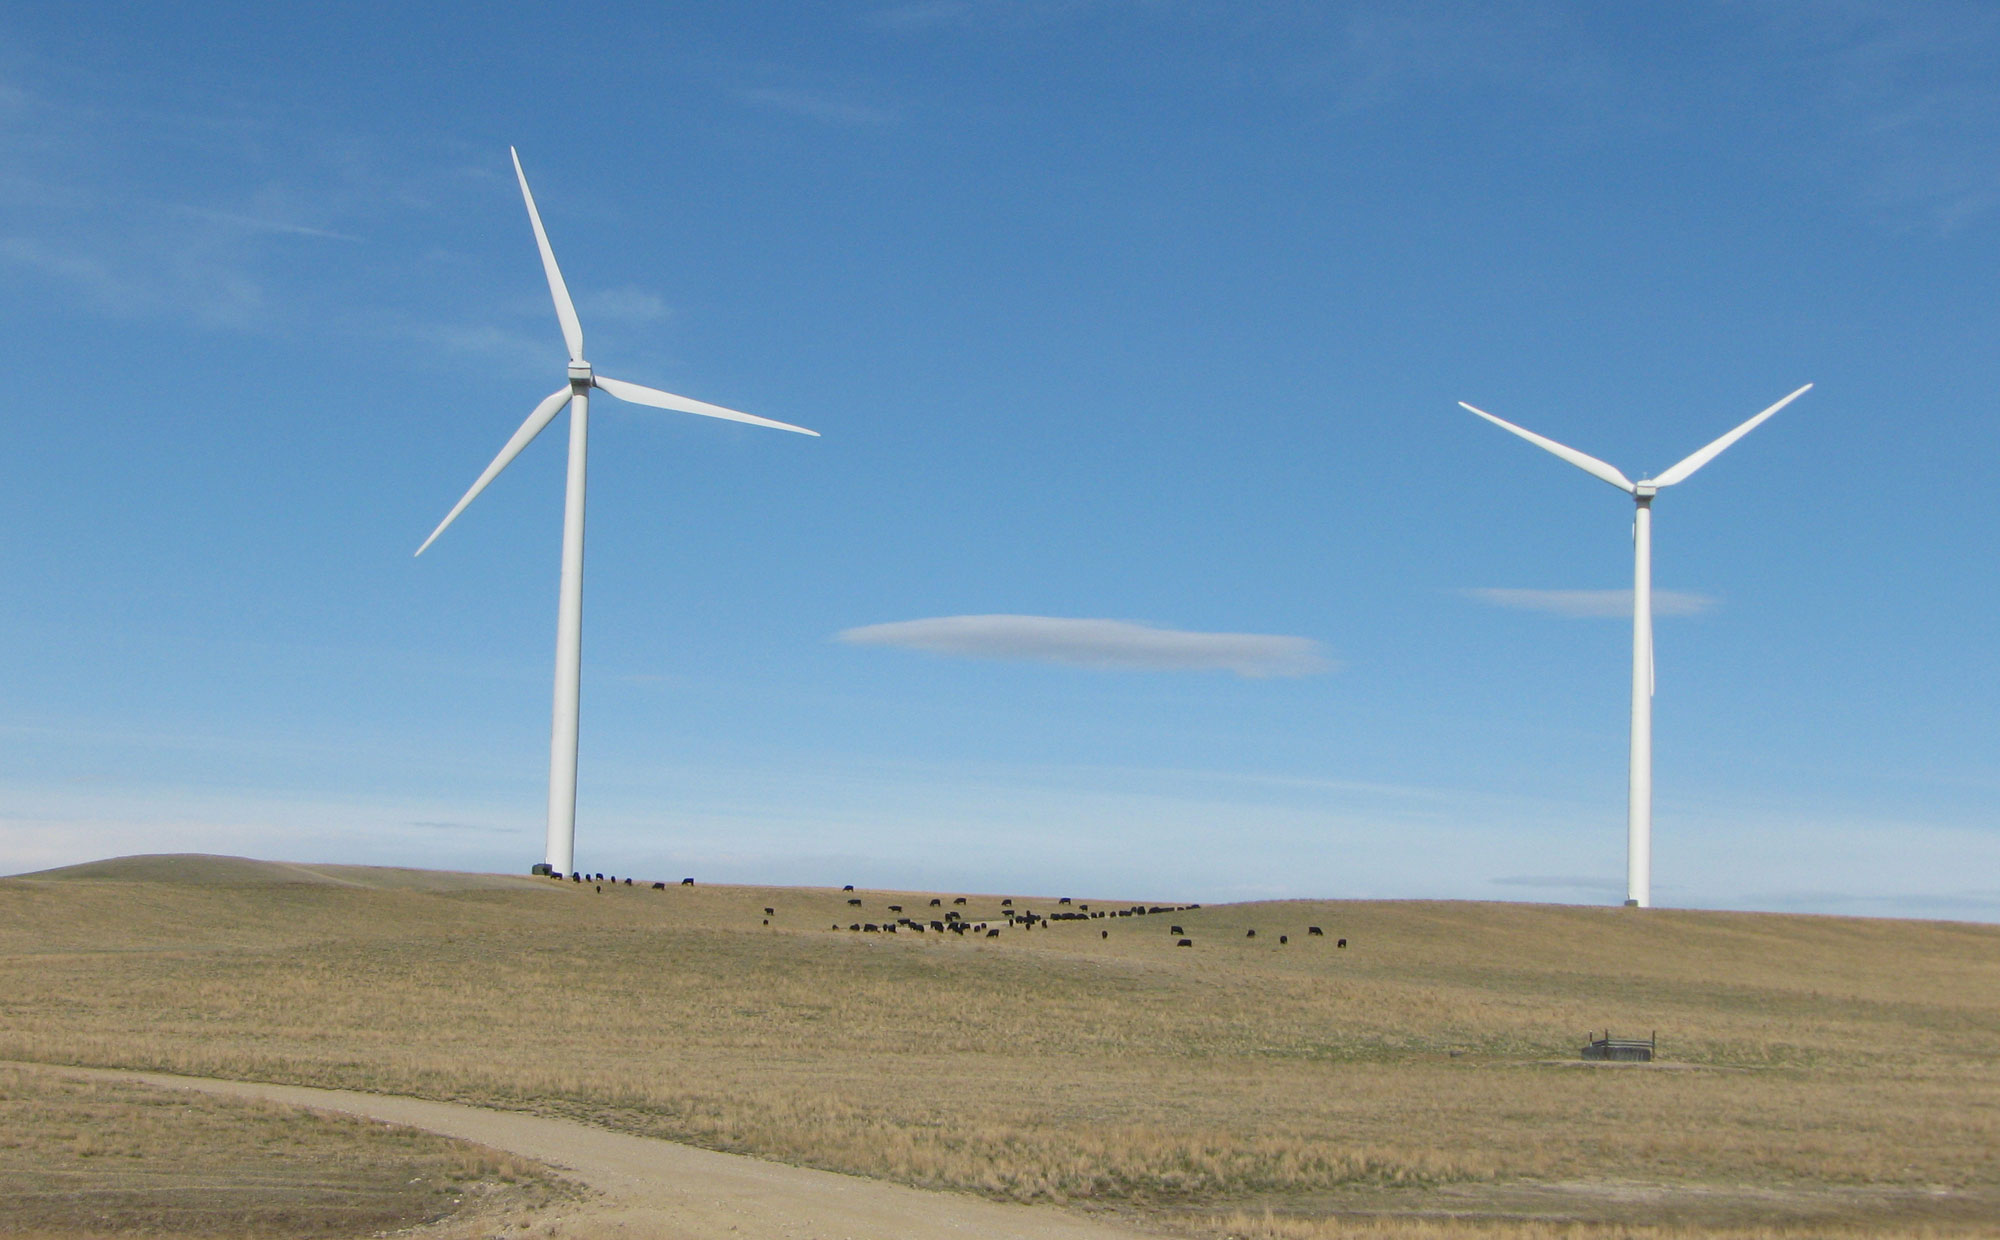 Photograph of wind turbines near Judith Gap, Montana. The photo shows two large white wind turbines on a landscape of low rolling hills covered with yellowish grass. In the foreground, a bit of a gravel road can be seen. In the background, in front of the turbines, a herd of cows are grazing.